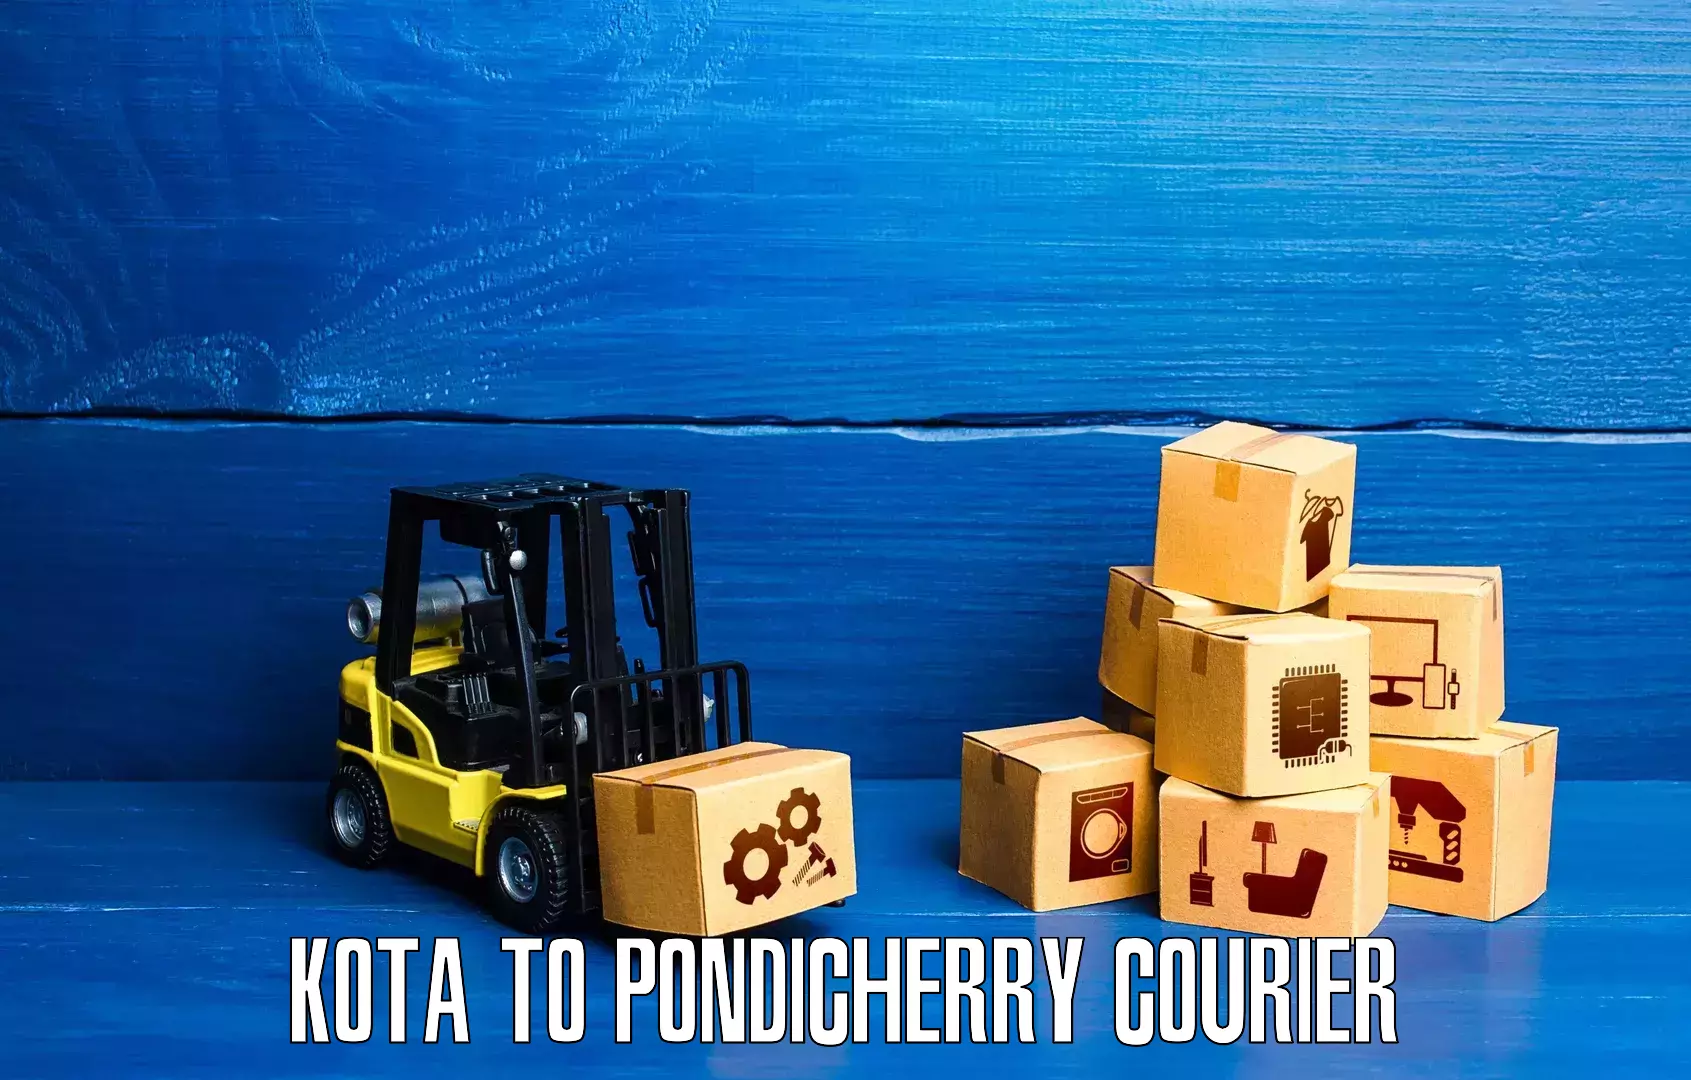 Express package services Kota to Pondicherry